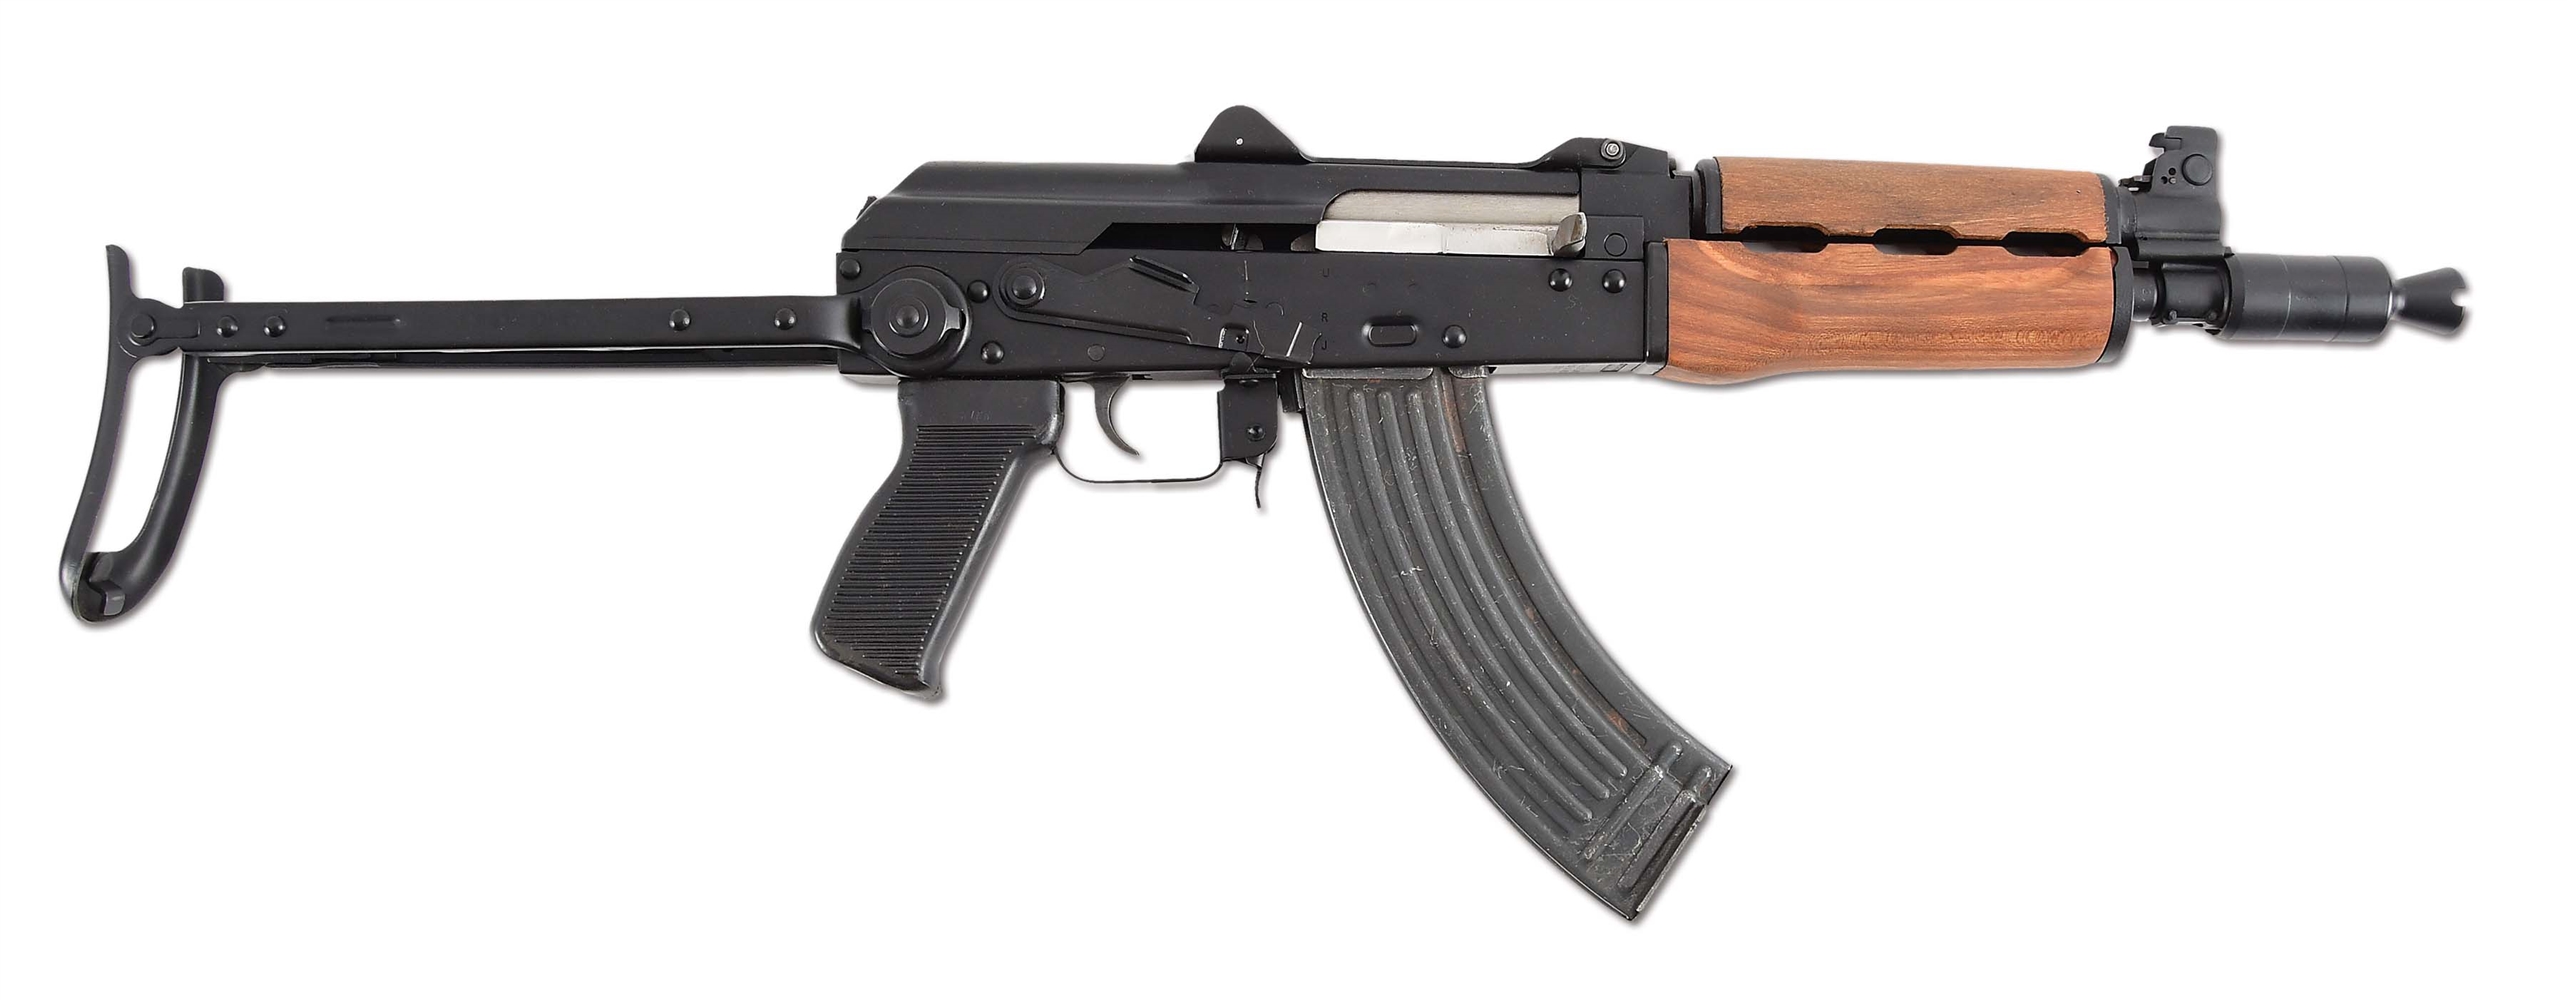 (N) EXCEPTIONALLY CLEAN HIGH CONDITION CHINESE UNDER-FOLDING STOCK AKS MACHINE GUN (FULLY TRANSFERABLE).